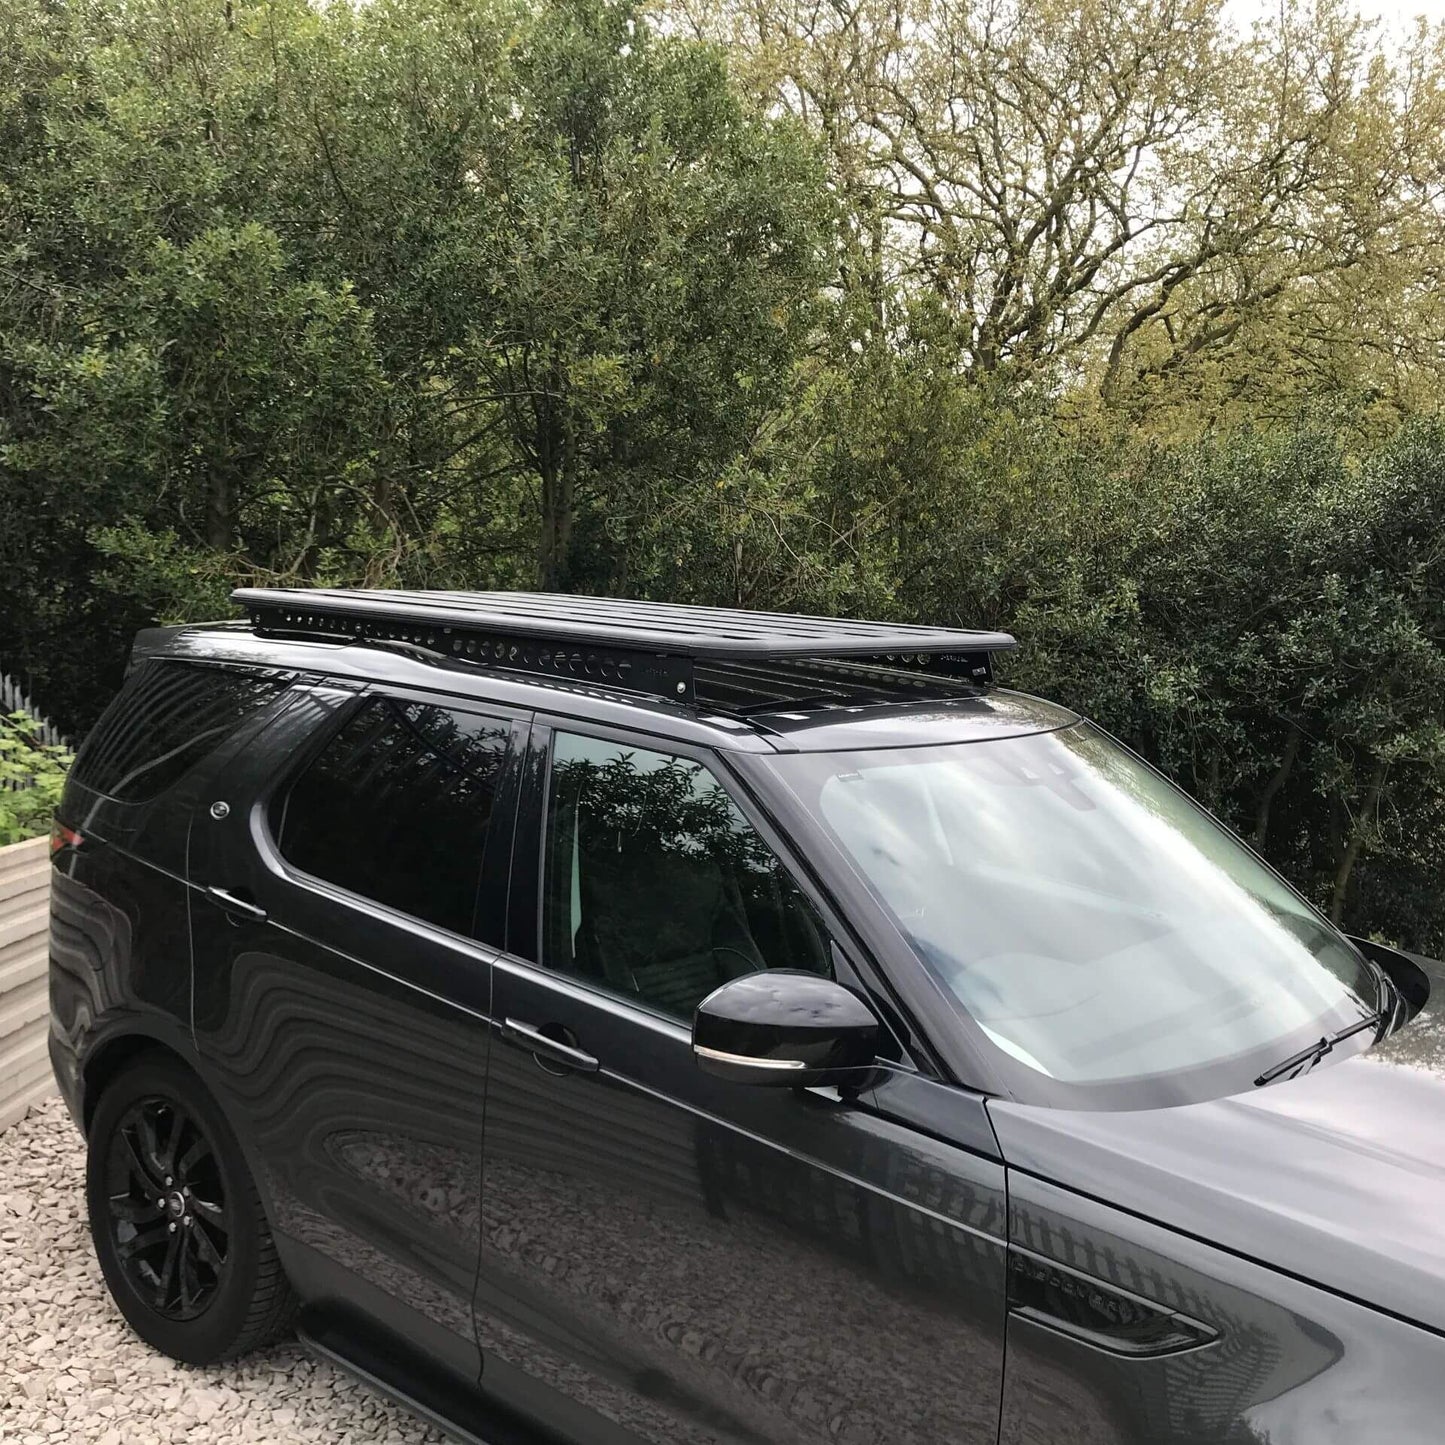 AluMod Low Profile 180cm x 125cm Roof Rack for the Land Rover Discovery 5 2017+